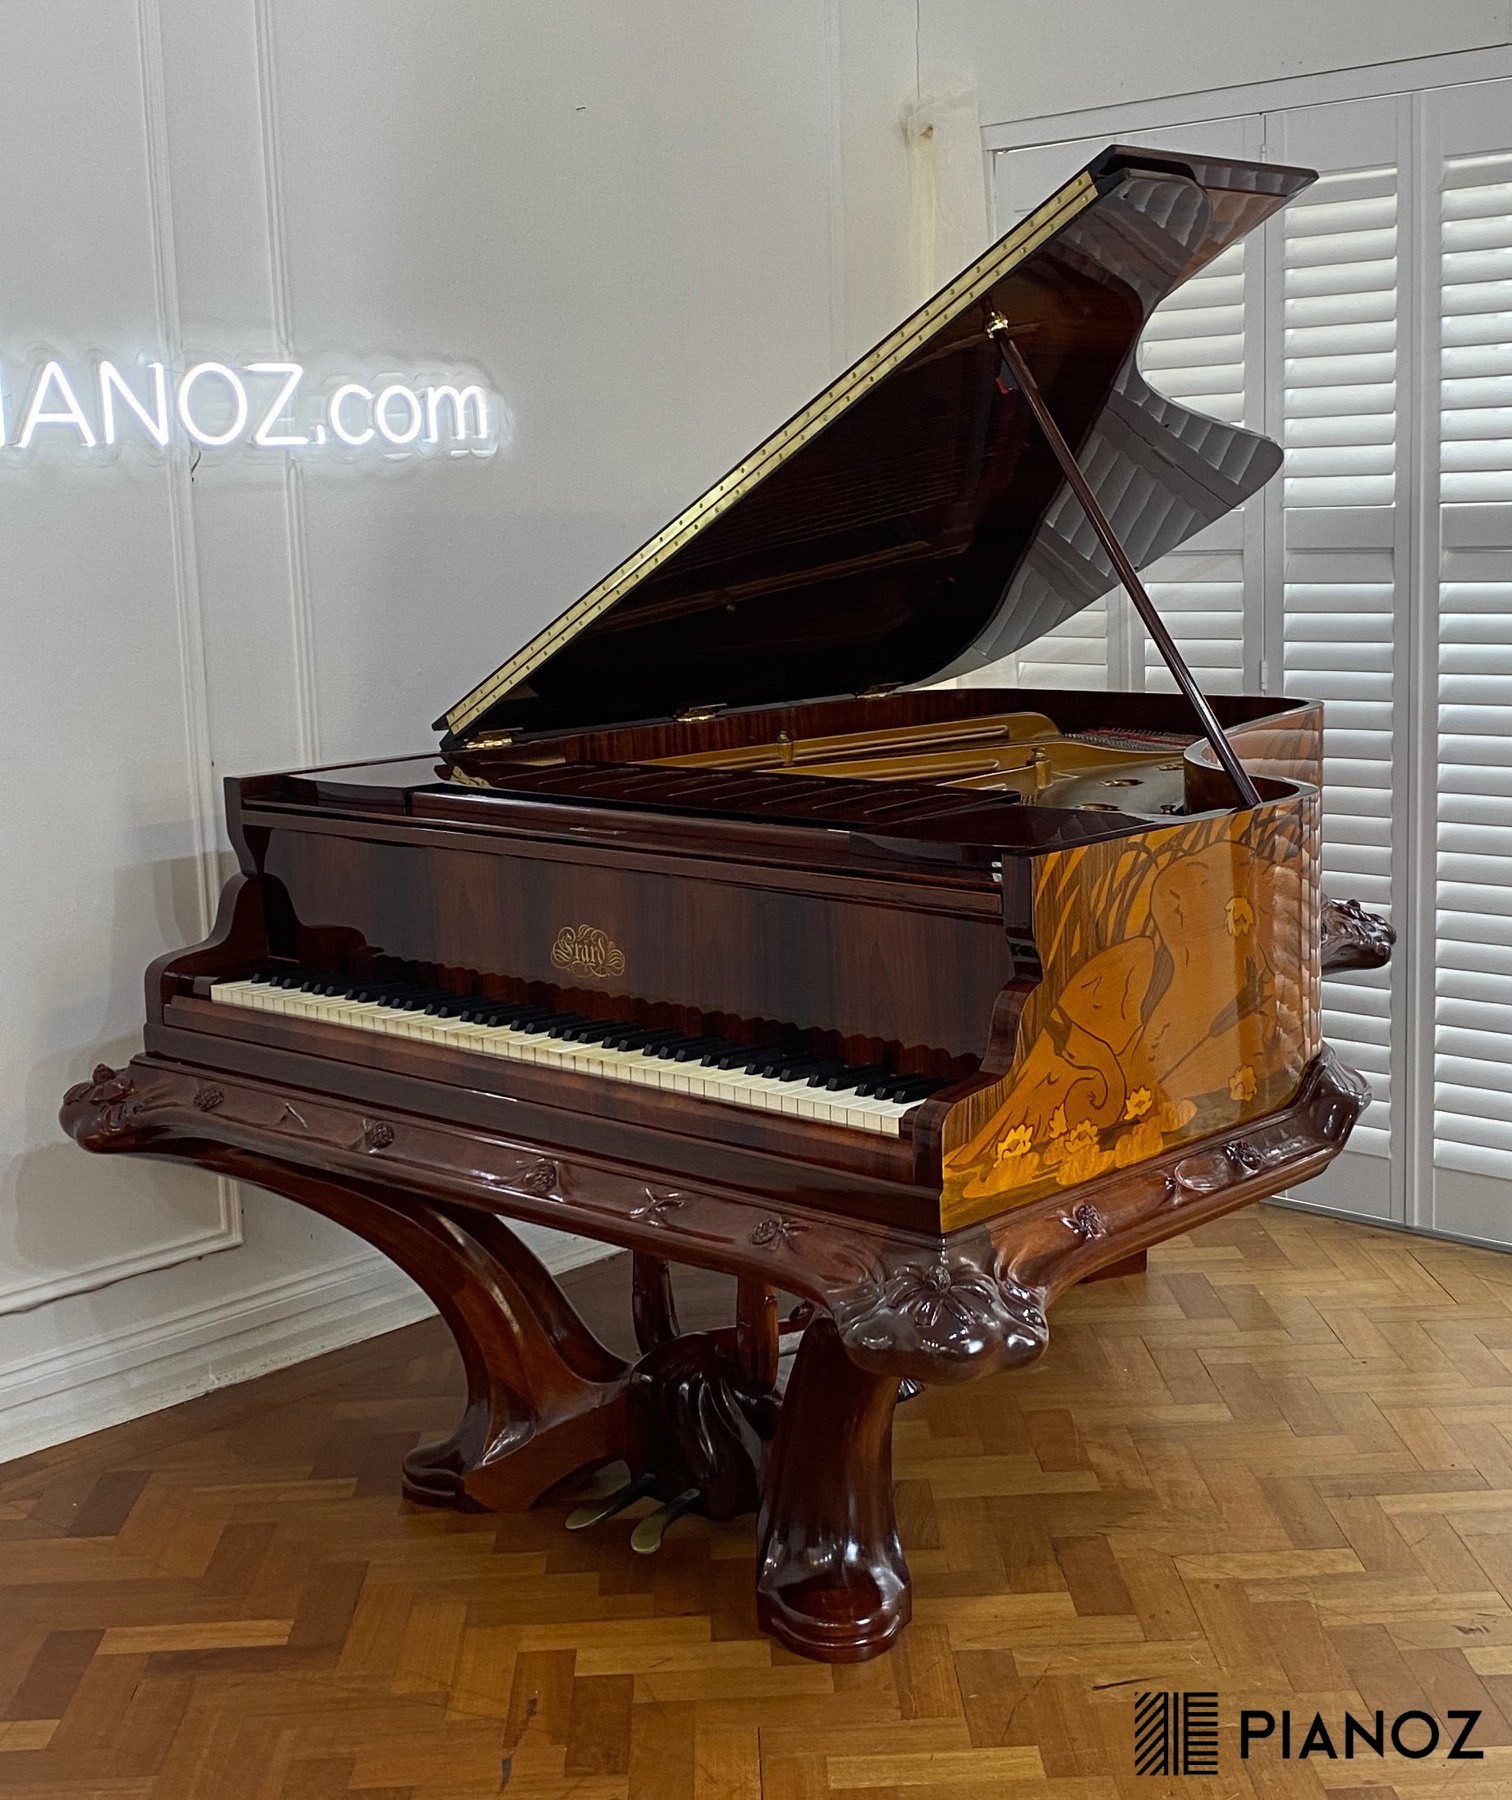 Erard Dying Swan Grand Piano piano for sale in UK